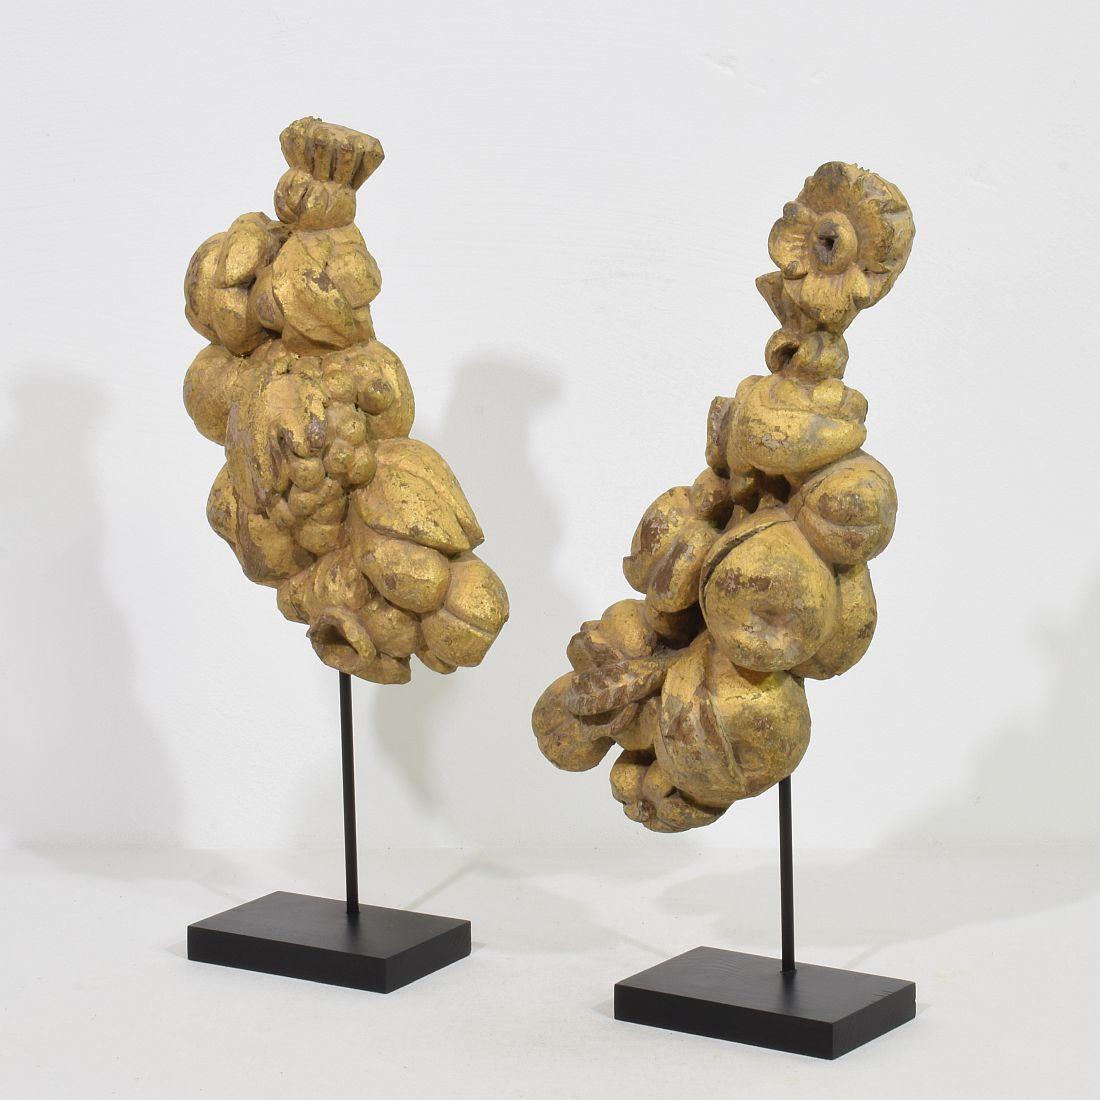 Wonderful pair of two baroque gilt oak ornaments,
France, circa 1650-1750. Weathered and small losses. Measurement here below of the largest one and includes the wooden base.